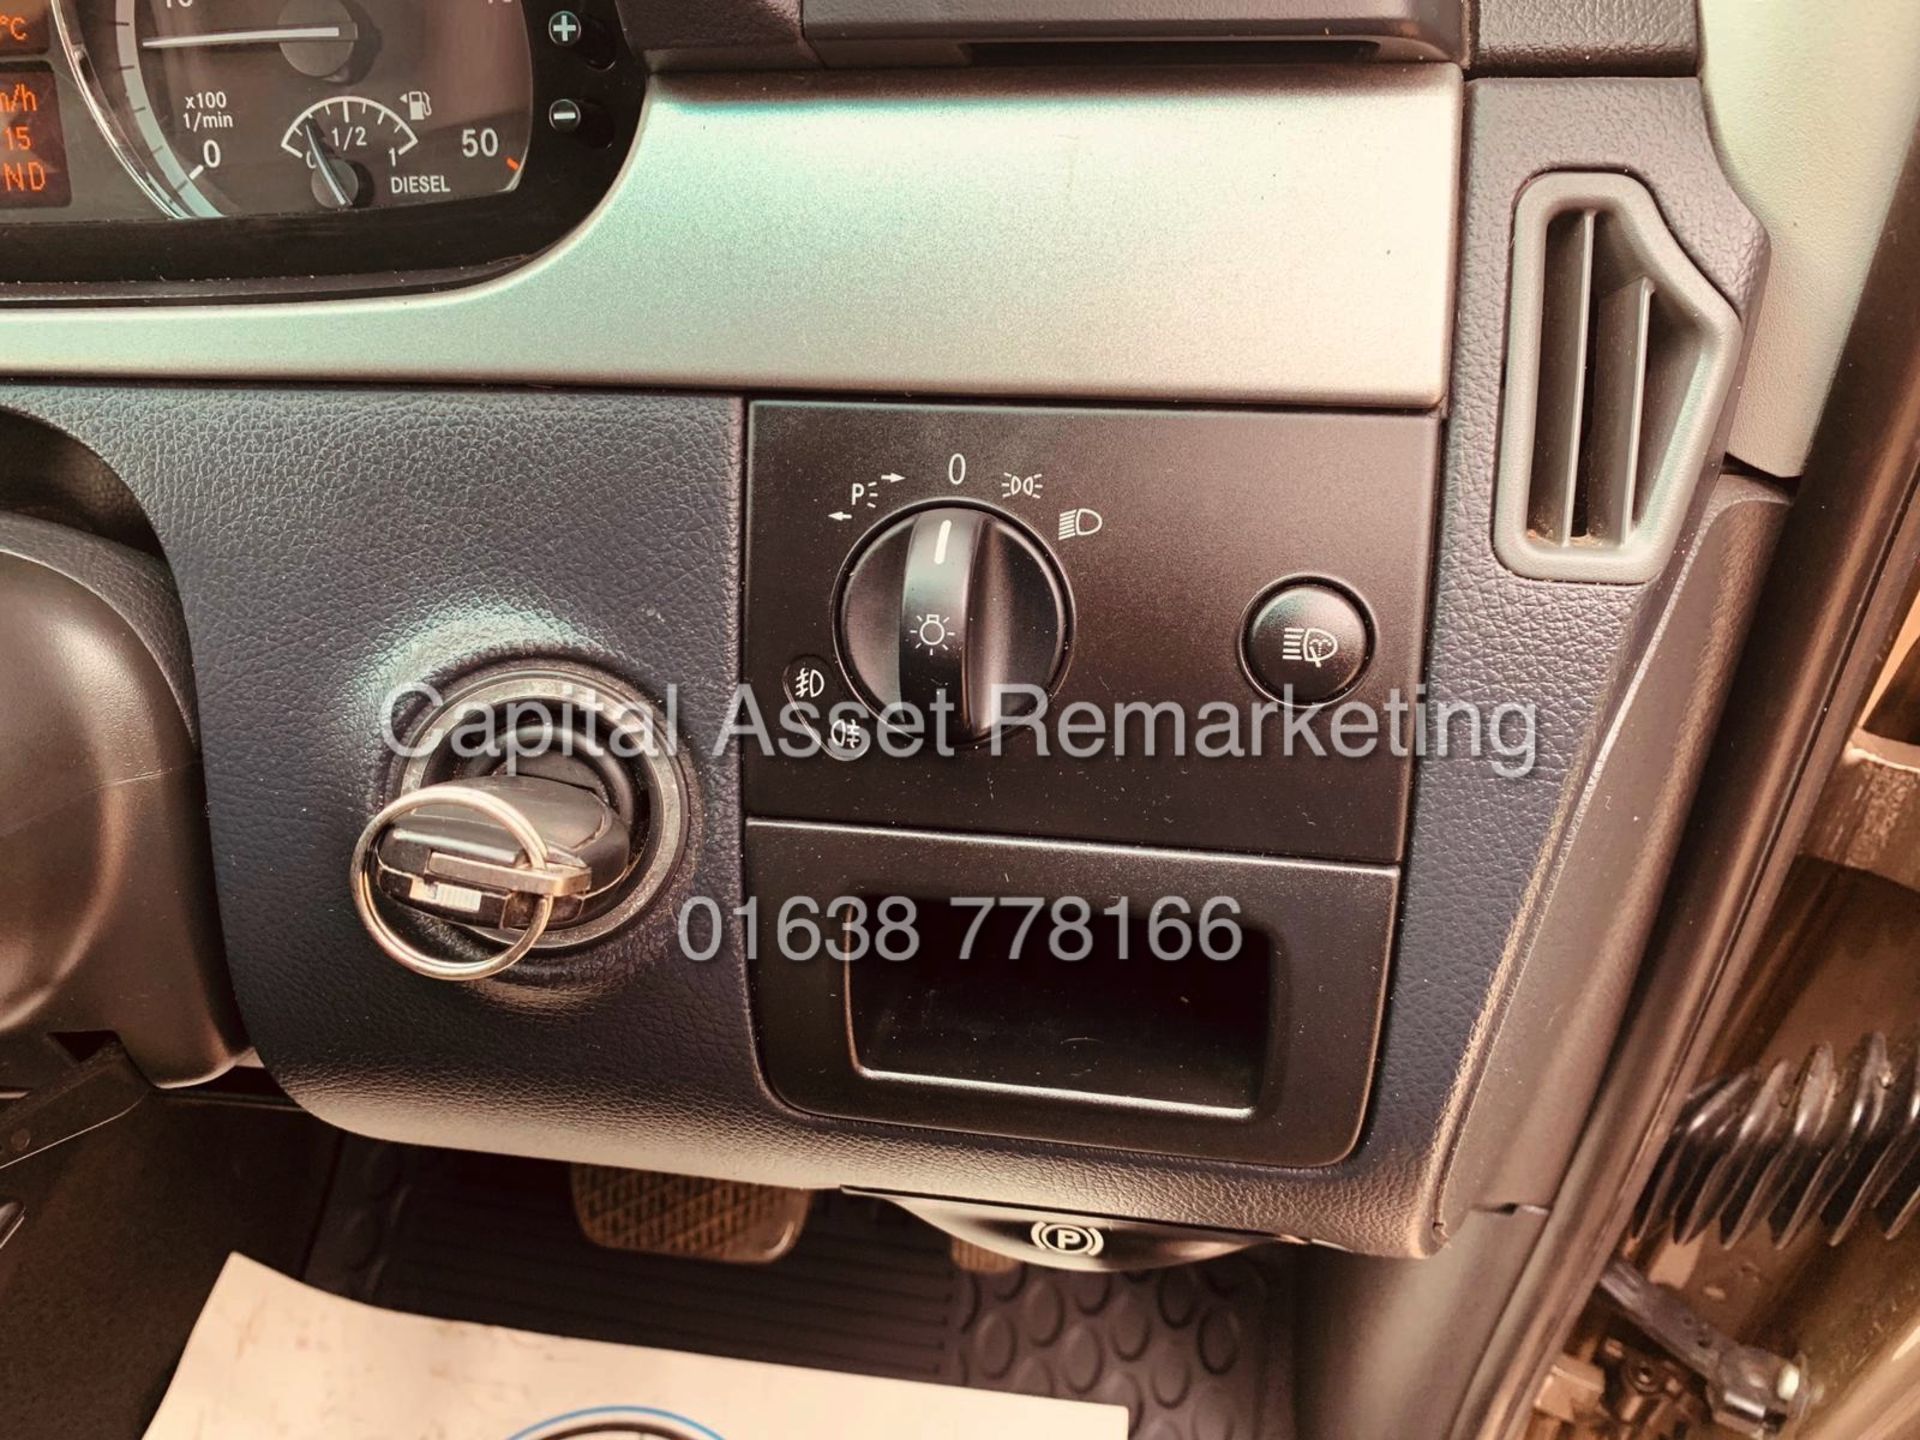 MERCEDES VITO 122CDI *SPORT-X SPEC* 8 SEATER DUALINER LWB (12 REG) 1 OWNER FSH -AIR CON-ALL THE TOYS - Image 14 of 19